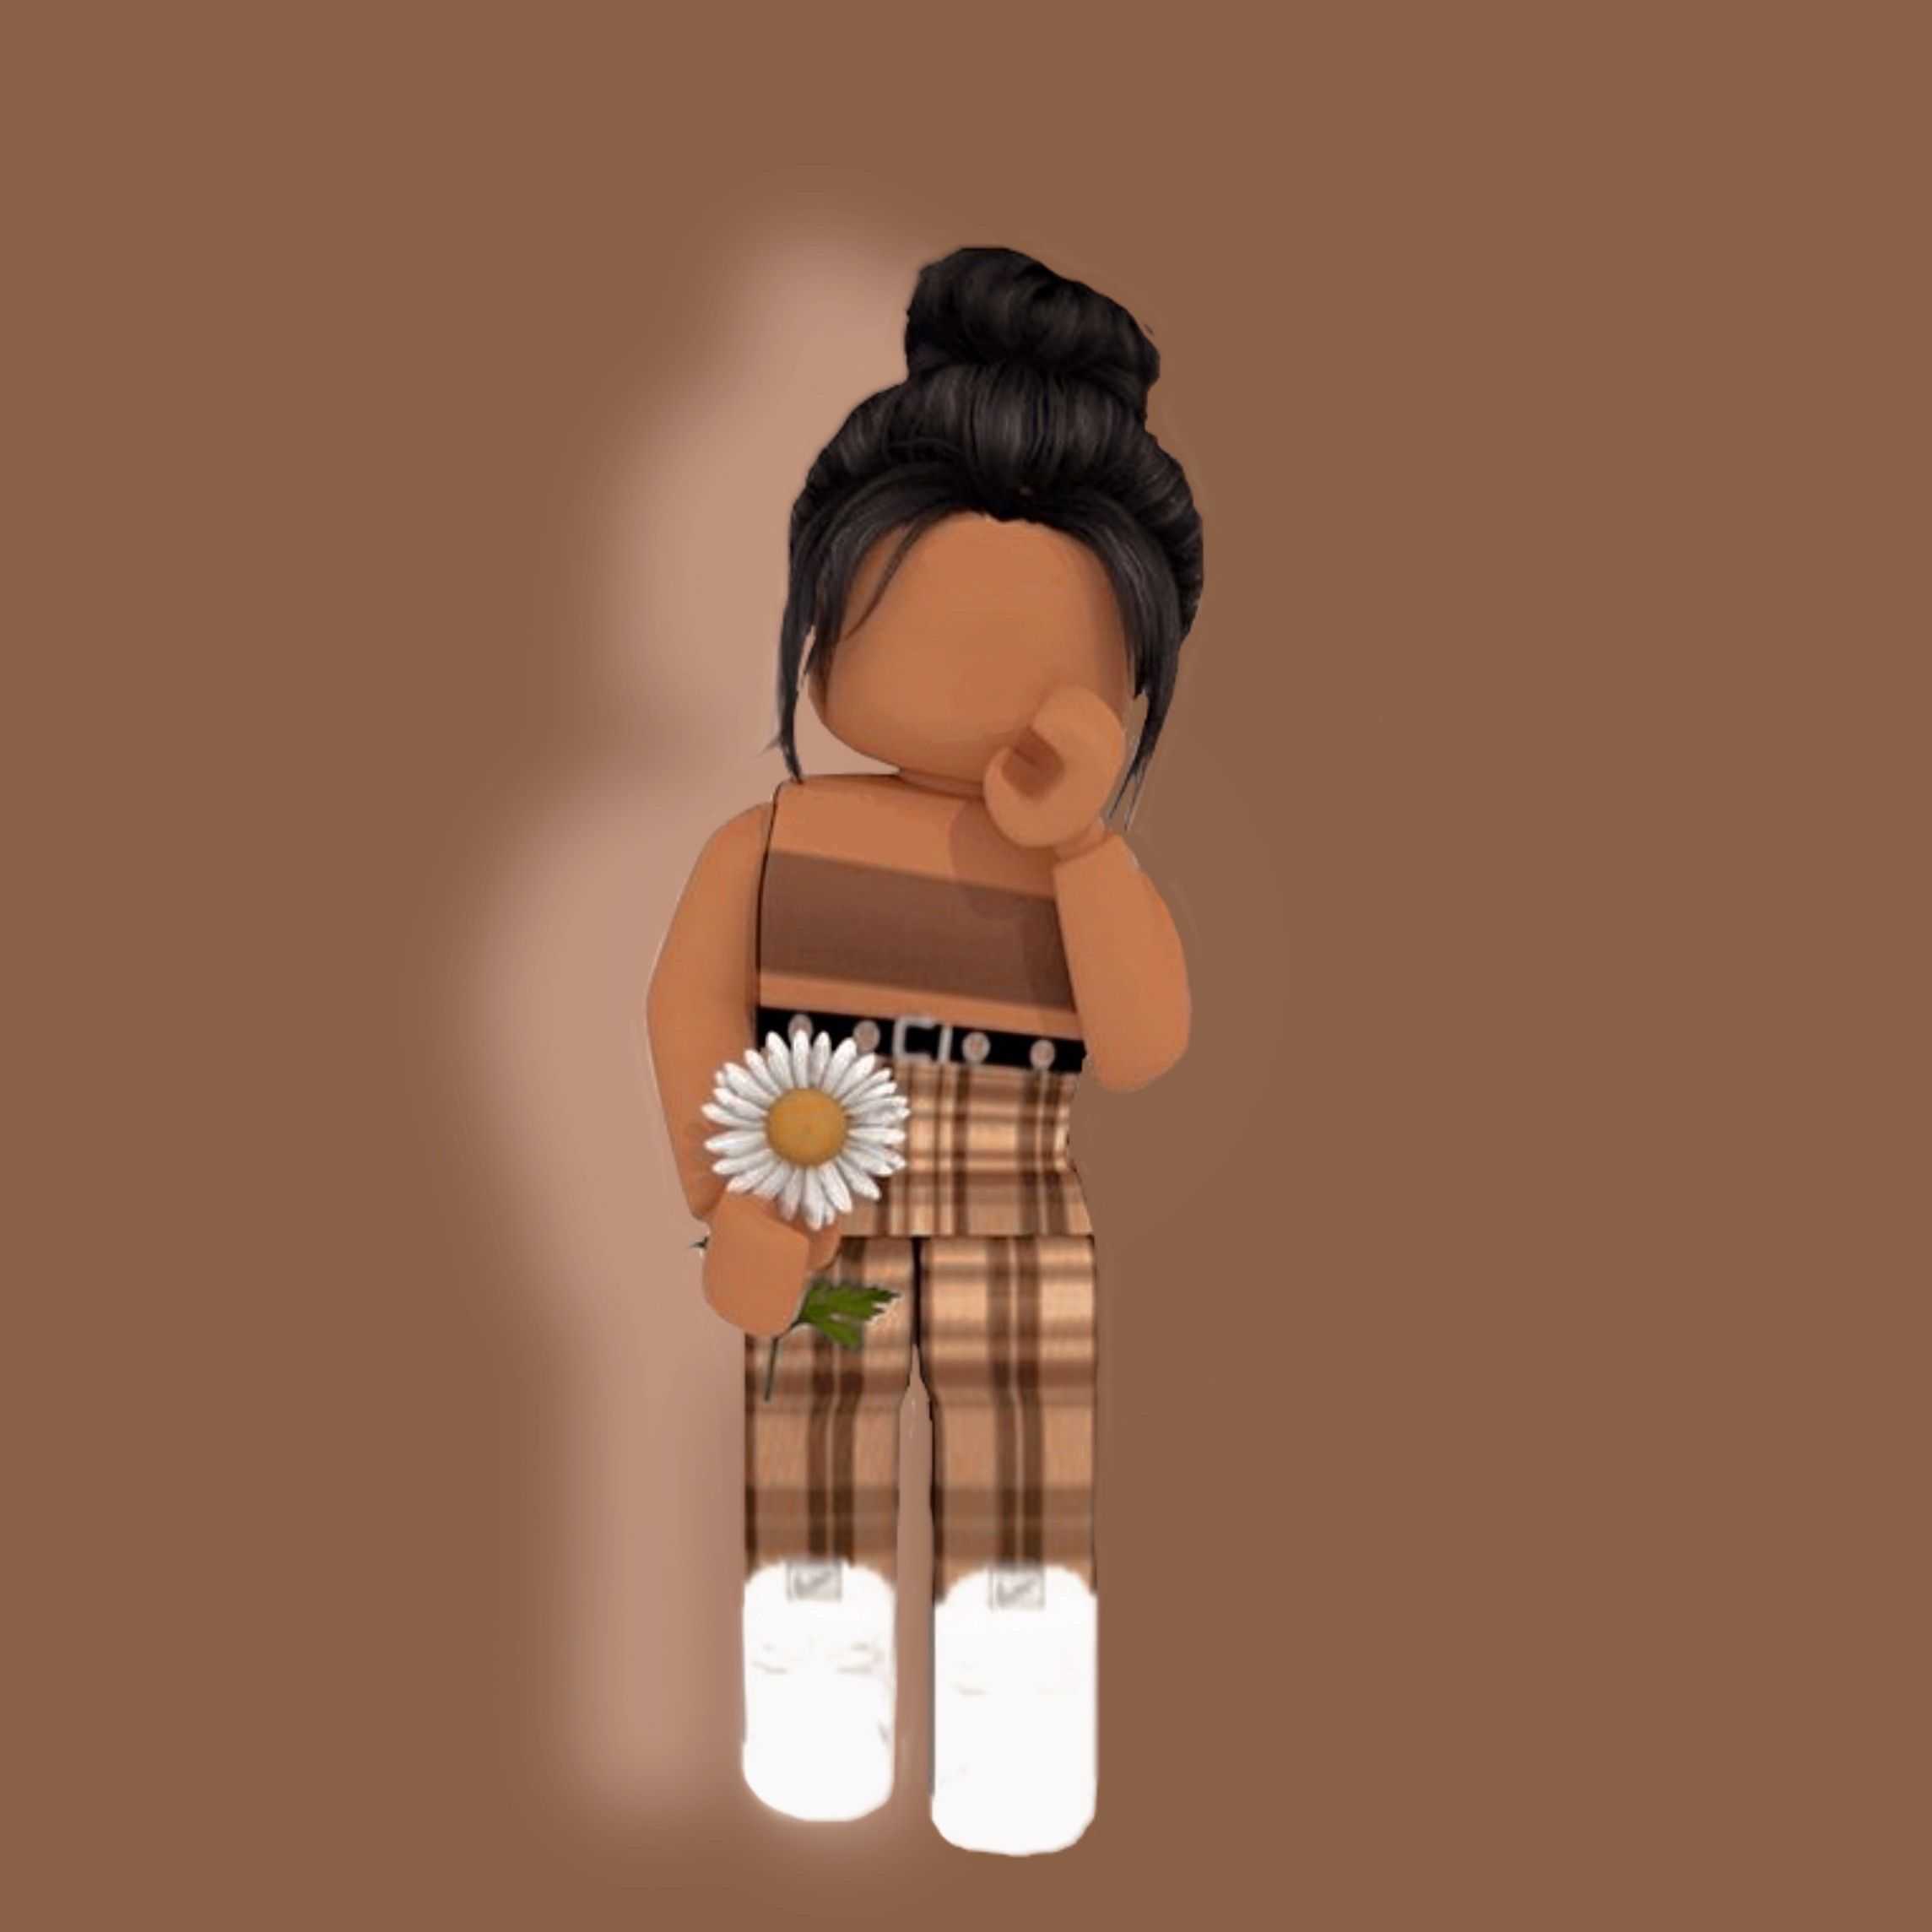 mariam sherif on Twitter preppy wallpaper girl outfit style  background vsco aesthetic roblox preppy wallpaper girlpreppy  httpstcocrnsO0vIfg httpstcoJizmXMRmER  Twitter